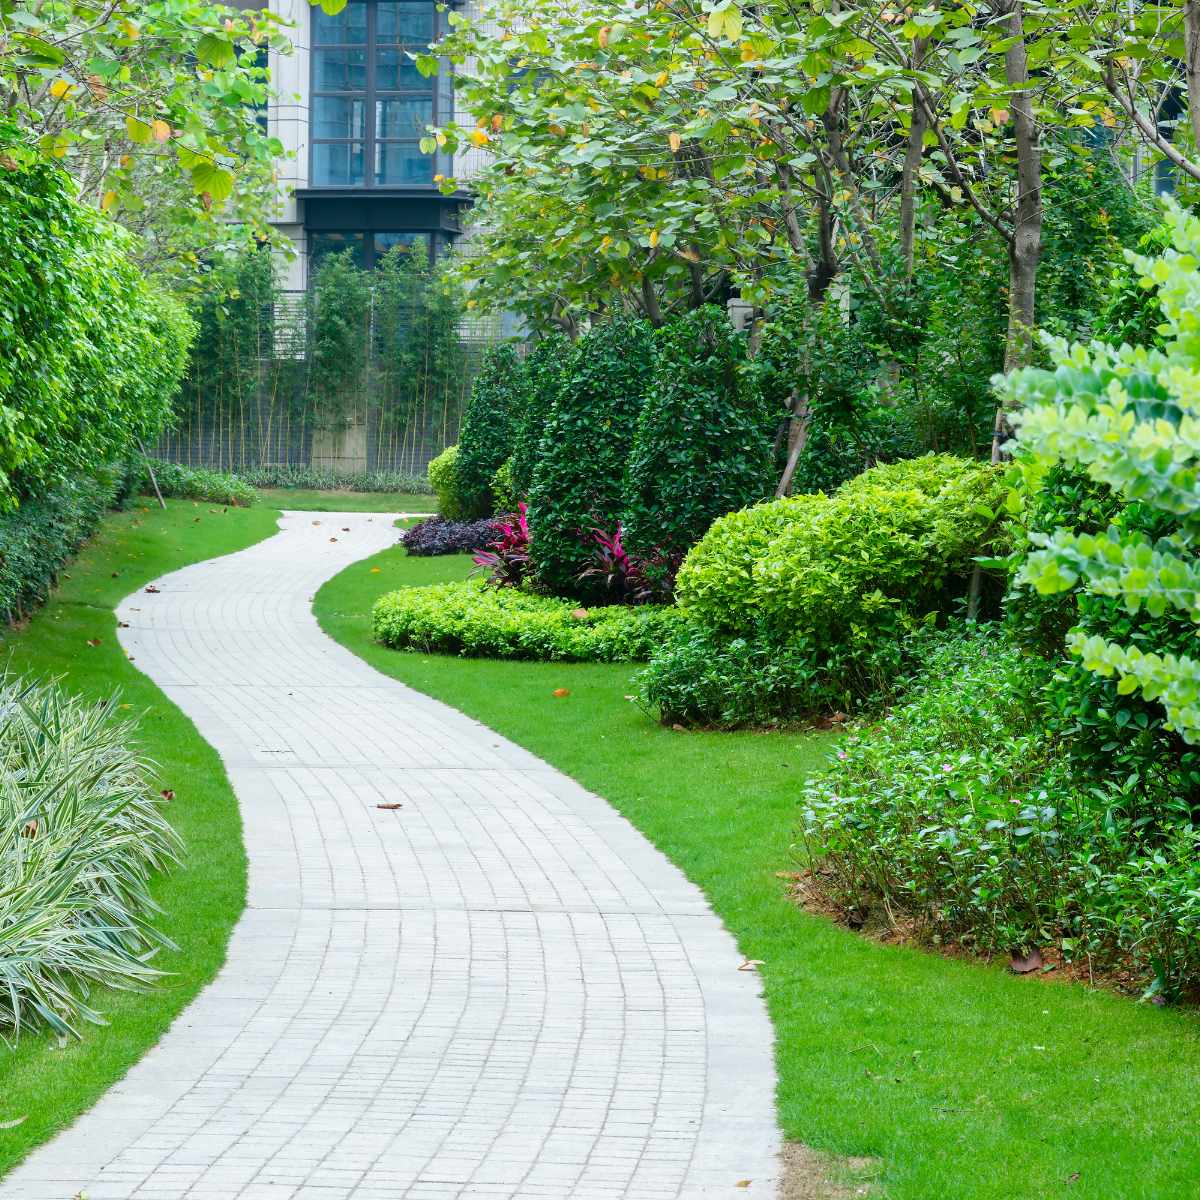 Tips on Creating the Perfect Path: Infusing Creativity and Garden Features